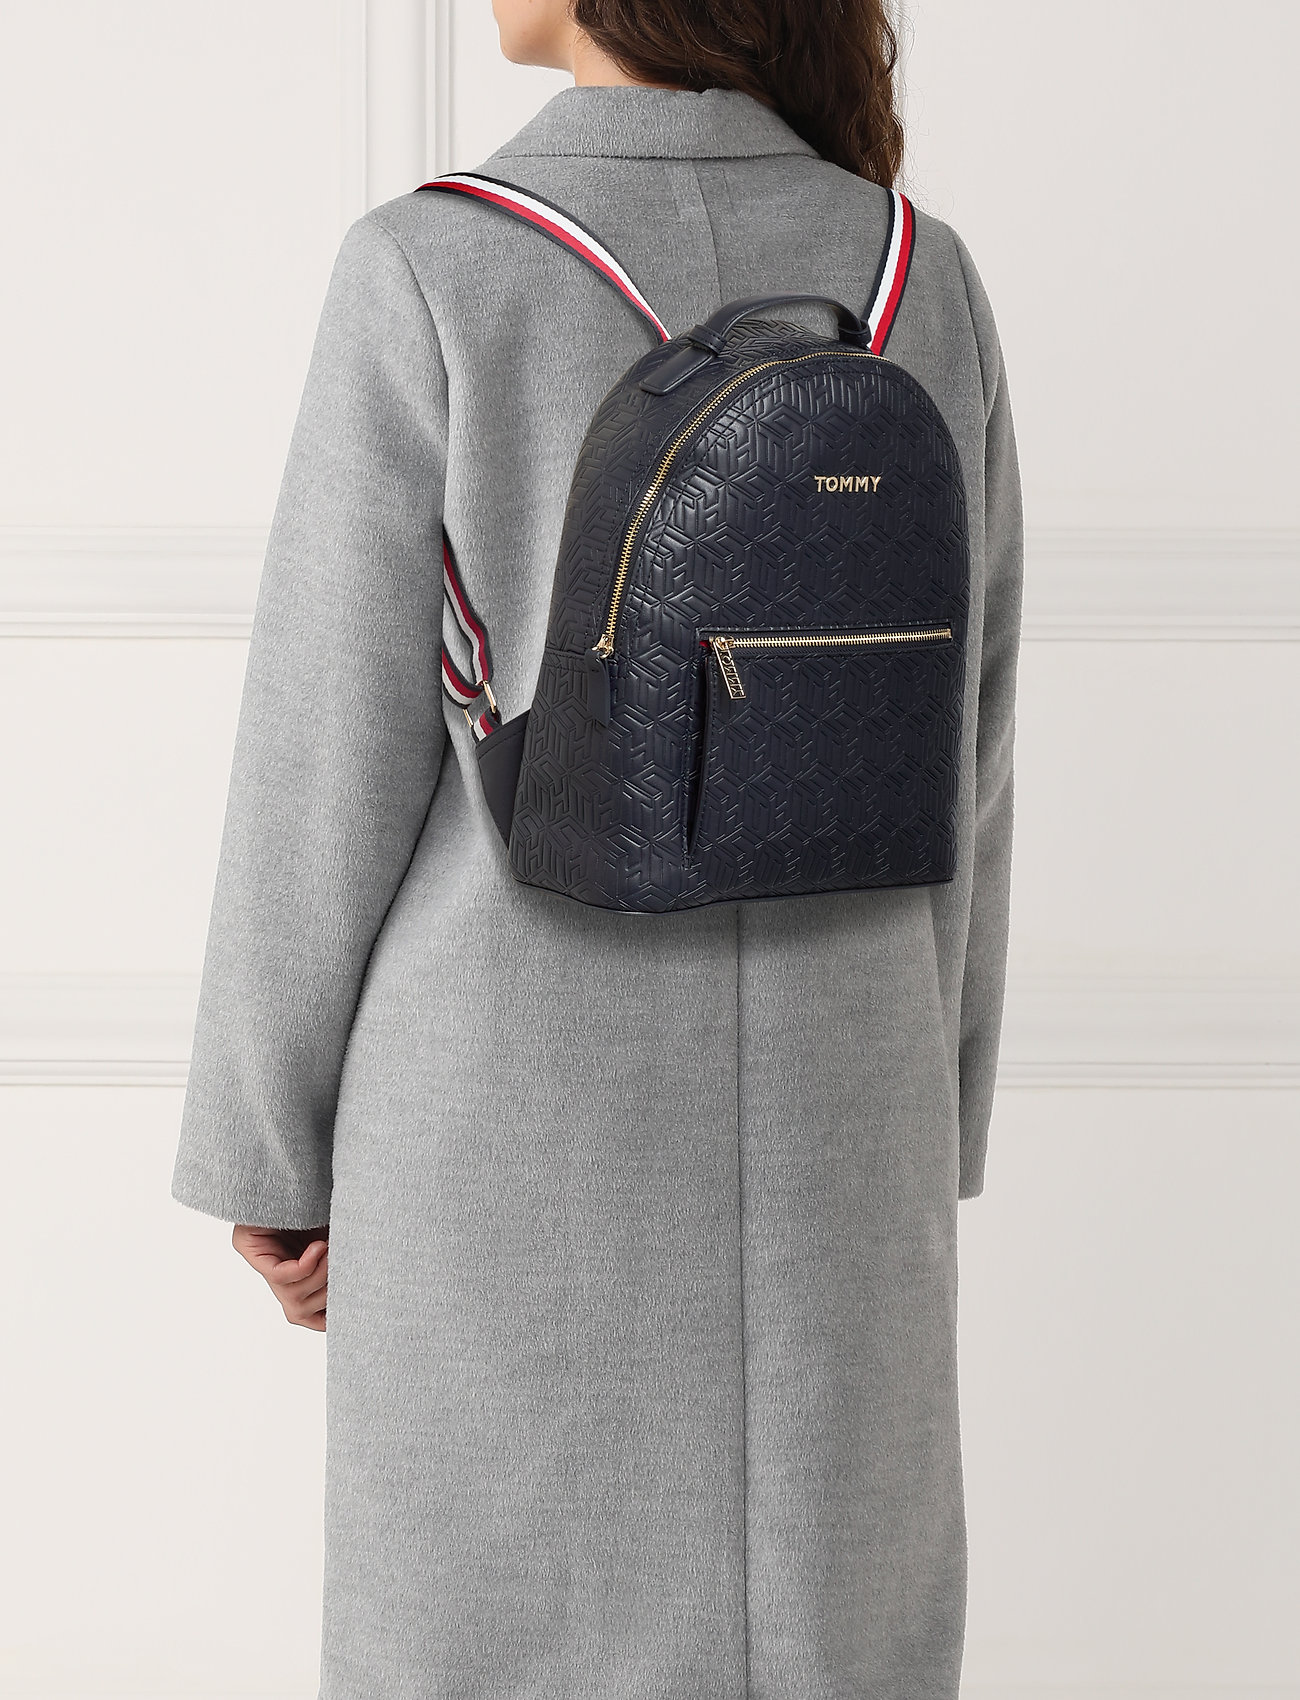 Iconic Tommy Backpac (T. Navy Embossed 